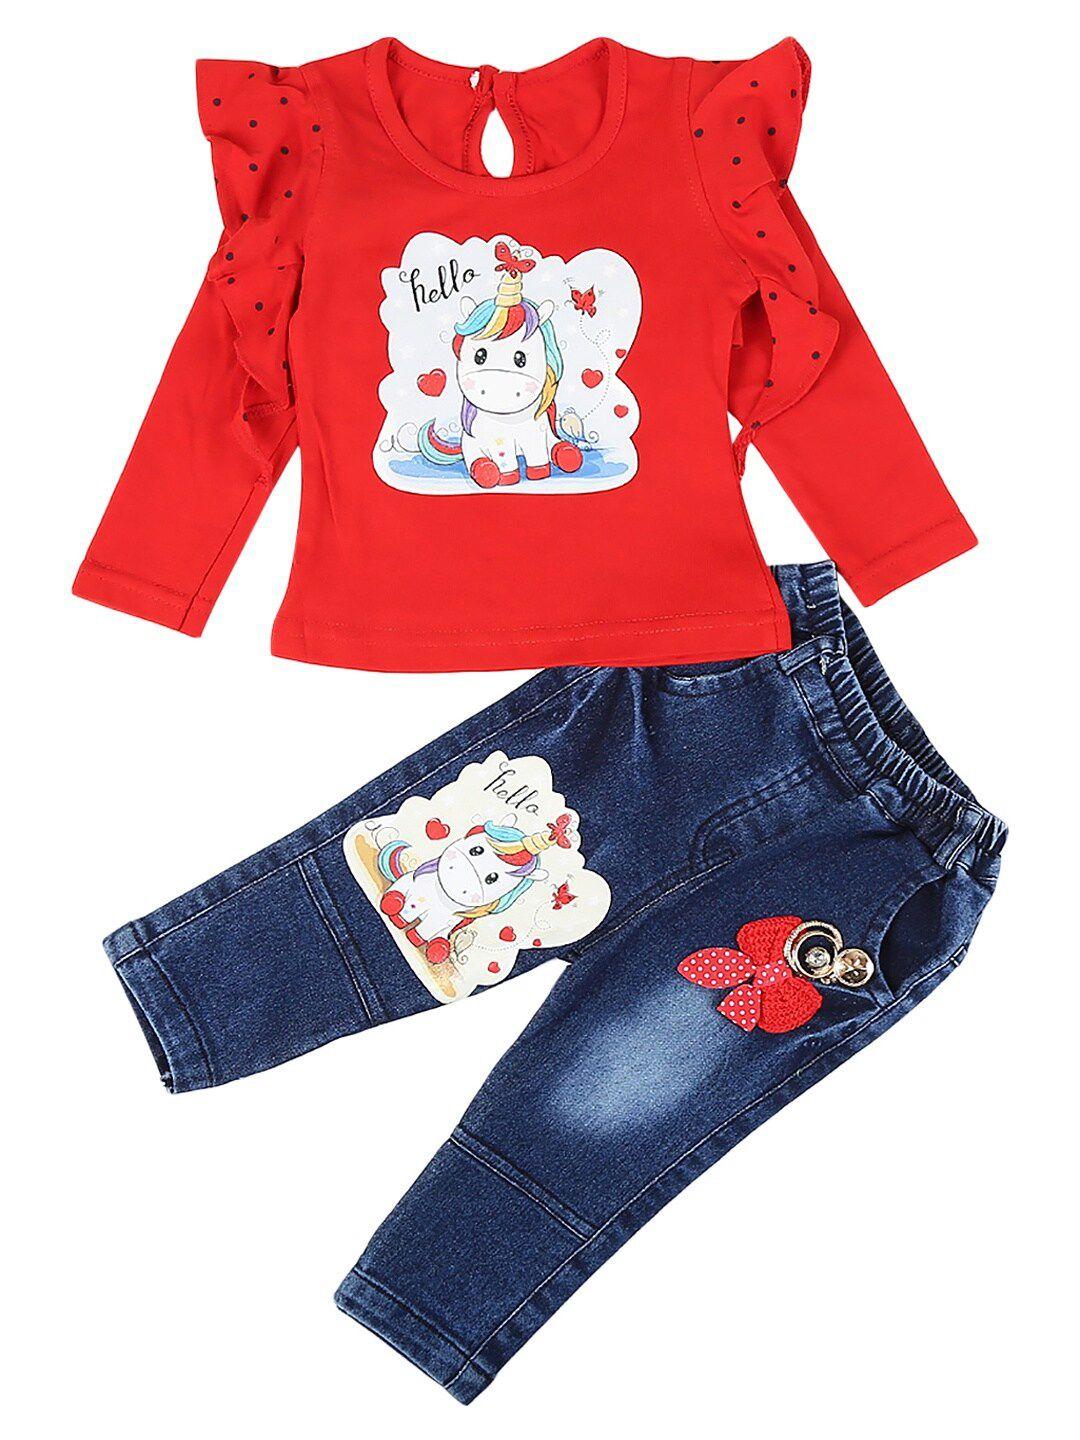 v-mart kids red & blue printed cotton top with trousers